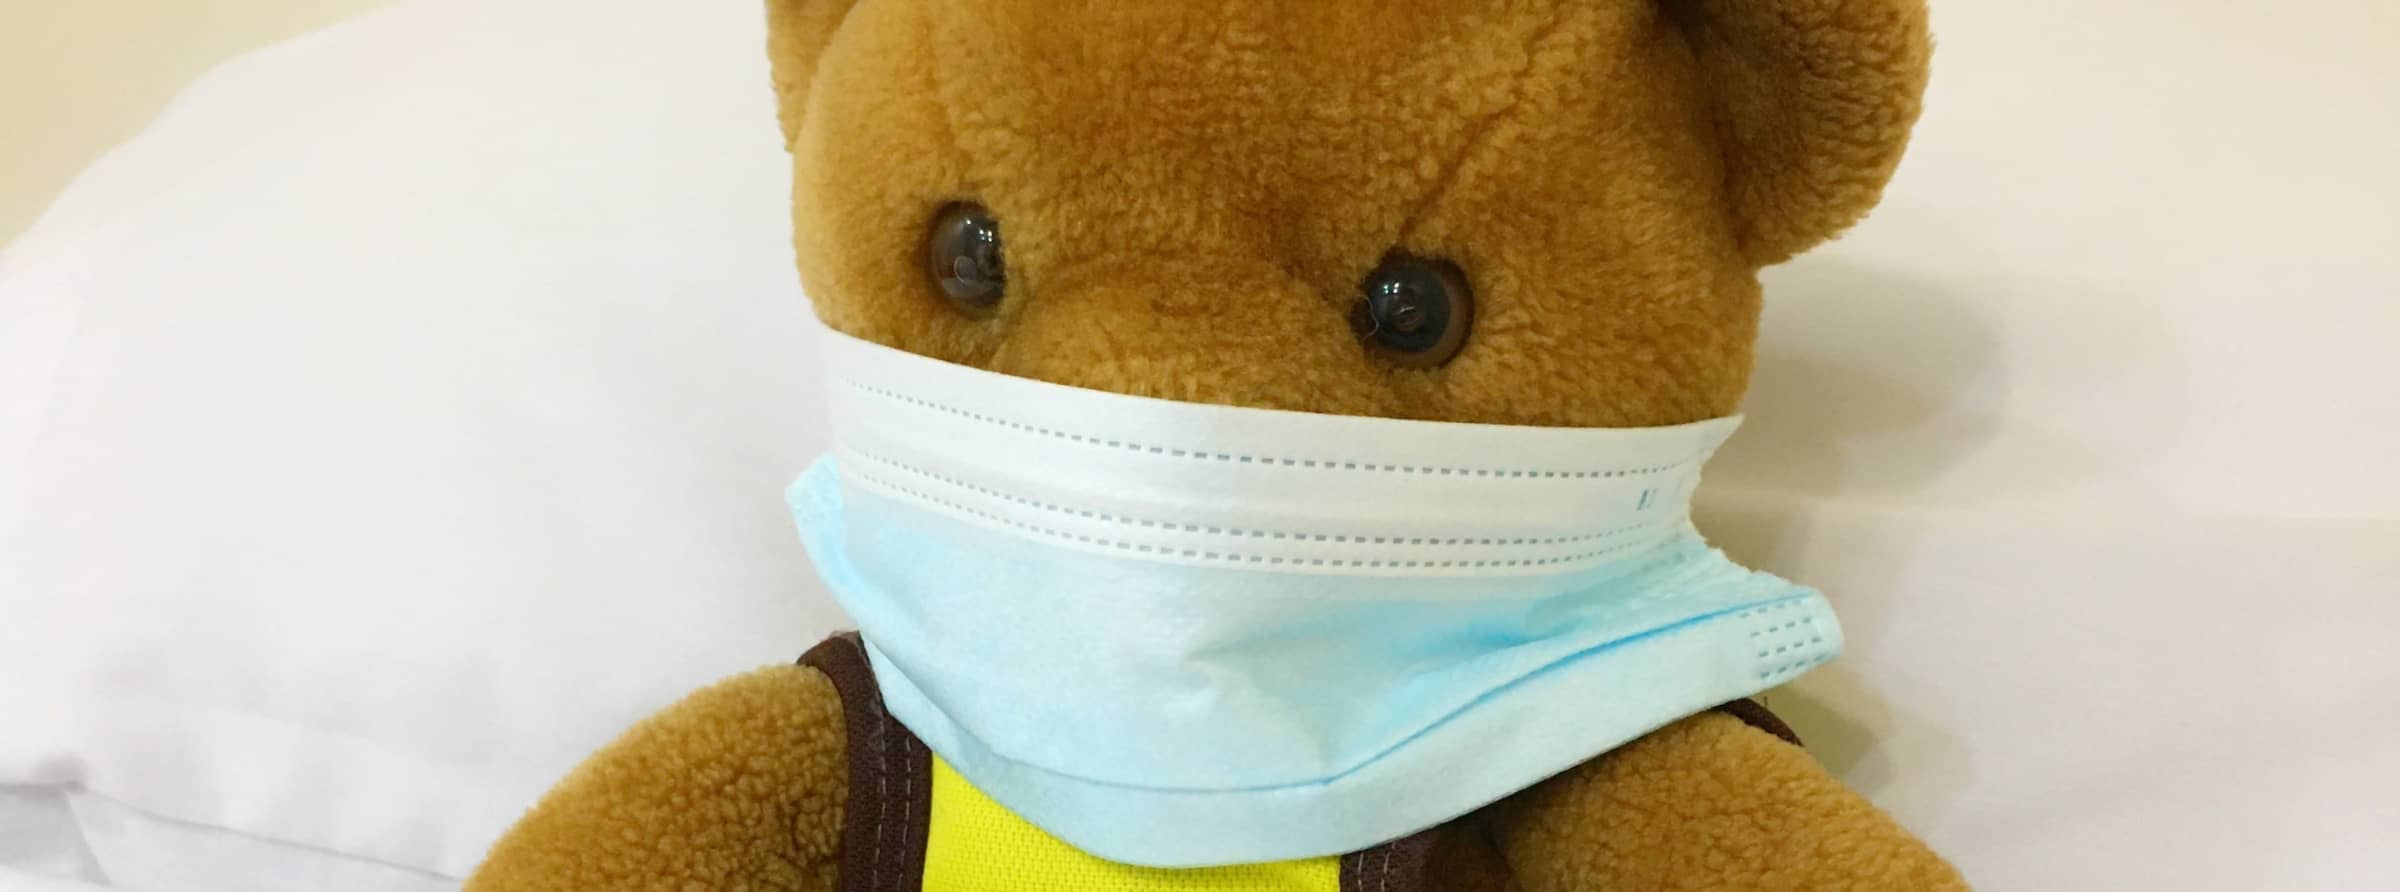 A child's teddy bear wearing a medical face mask